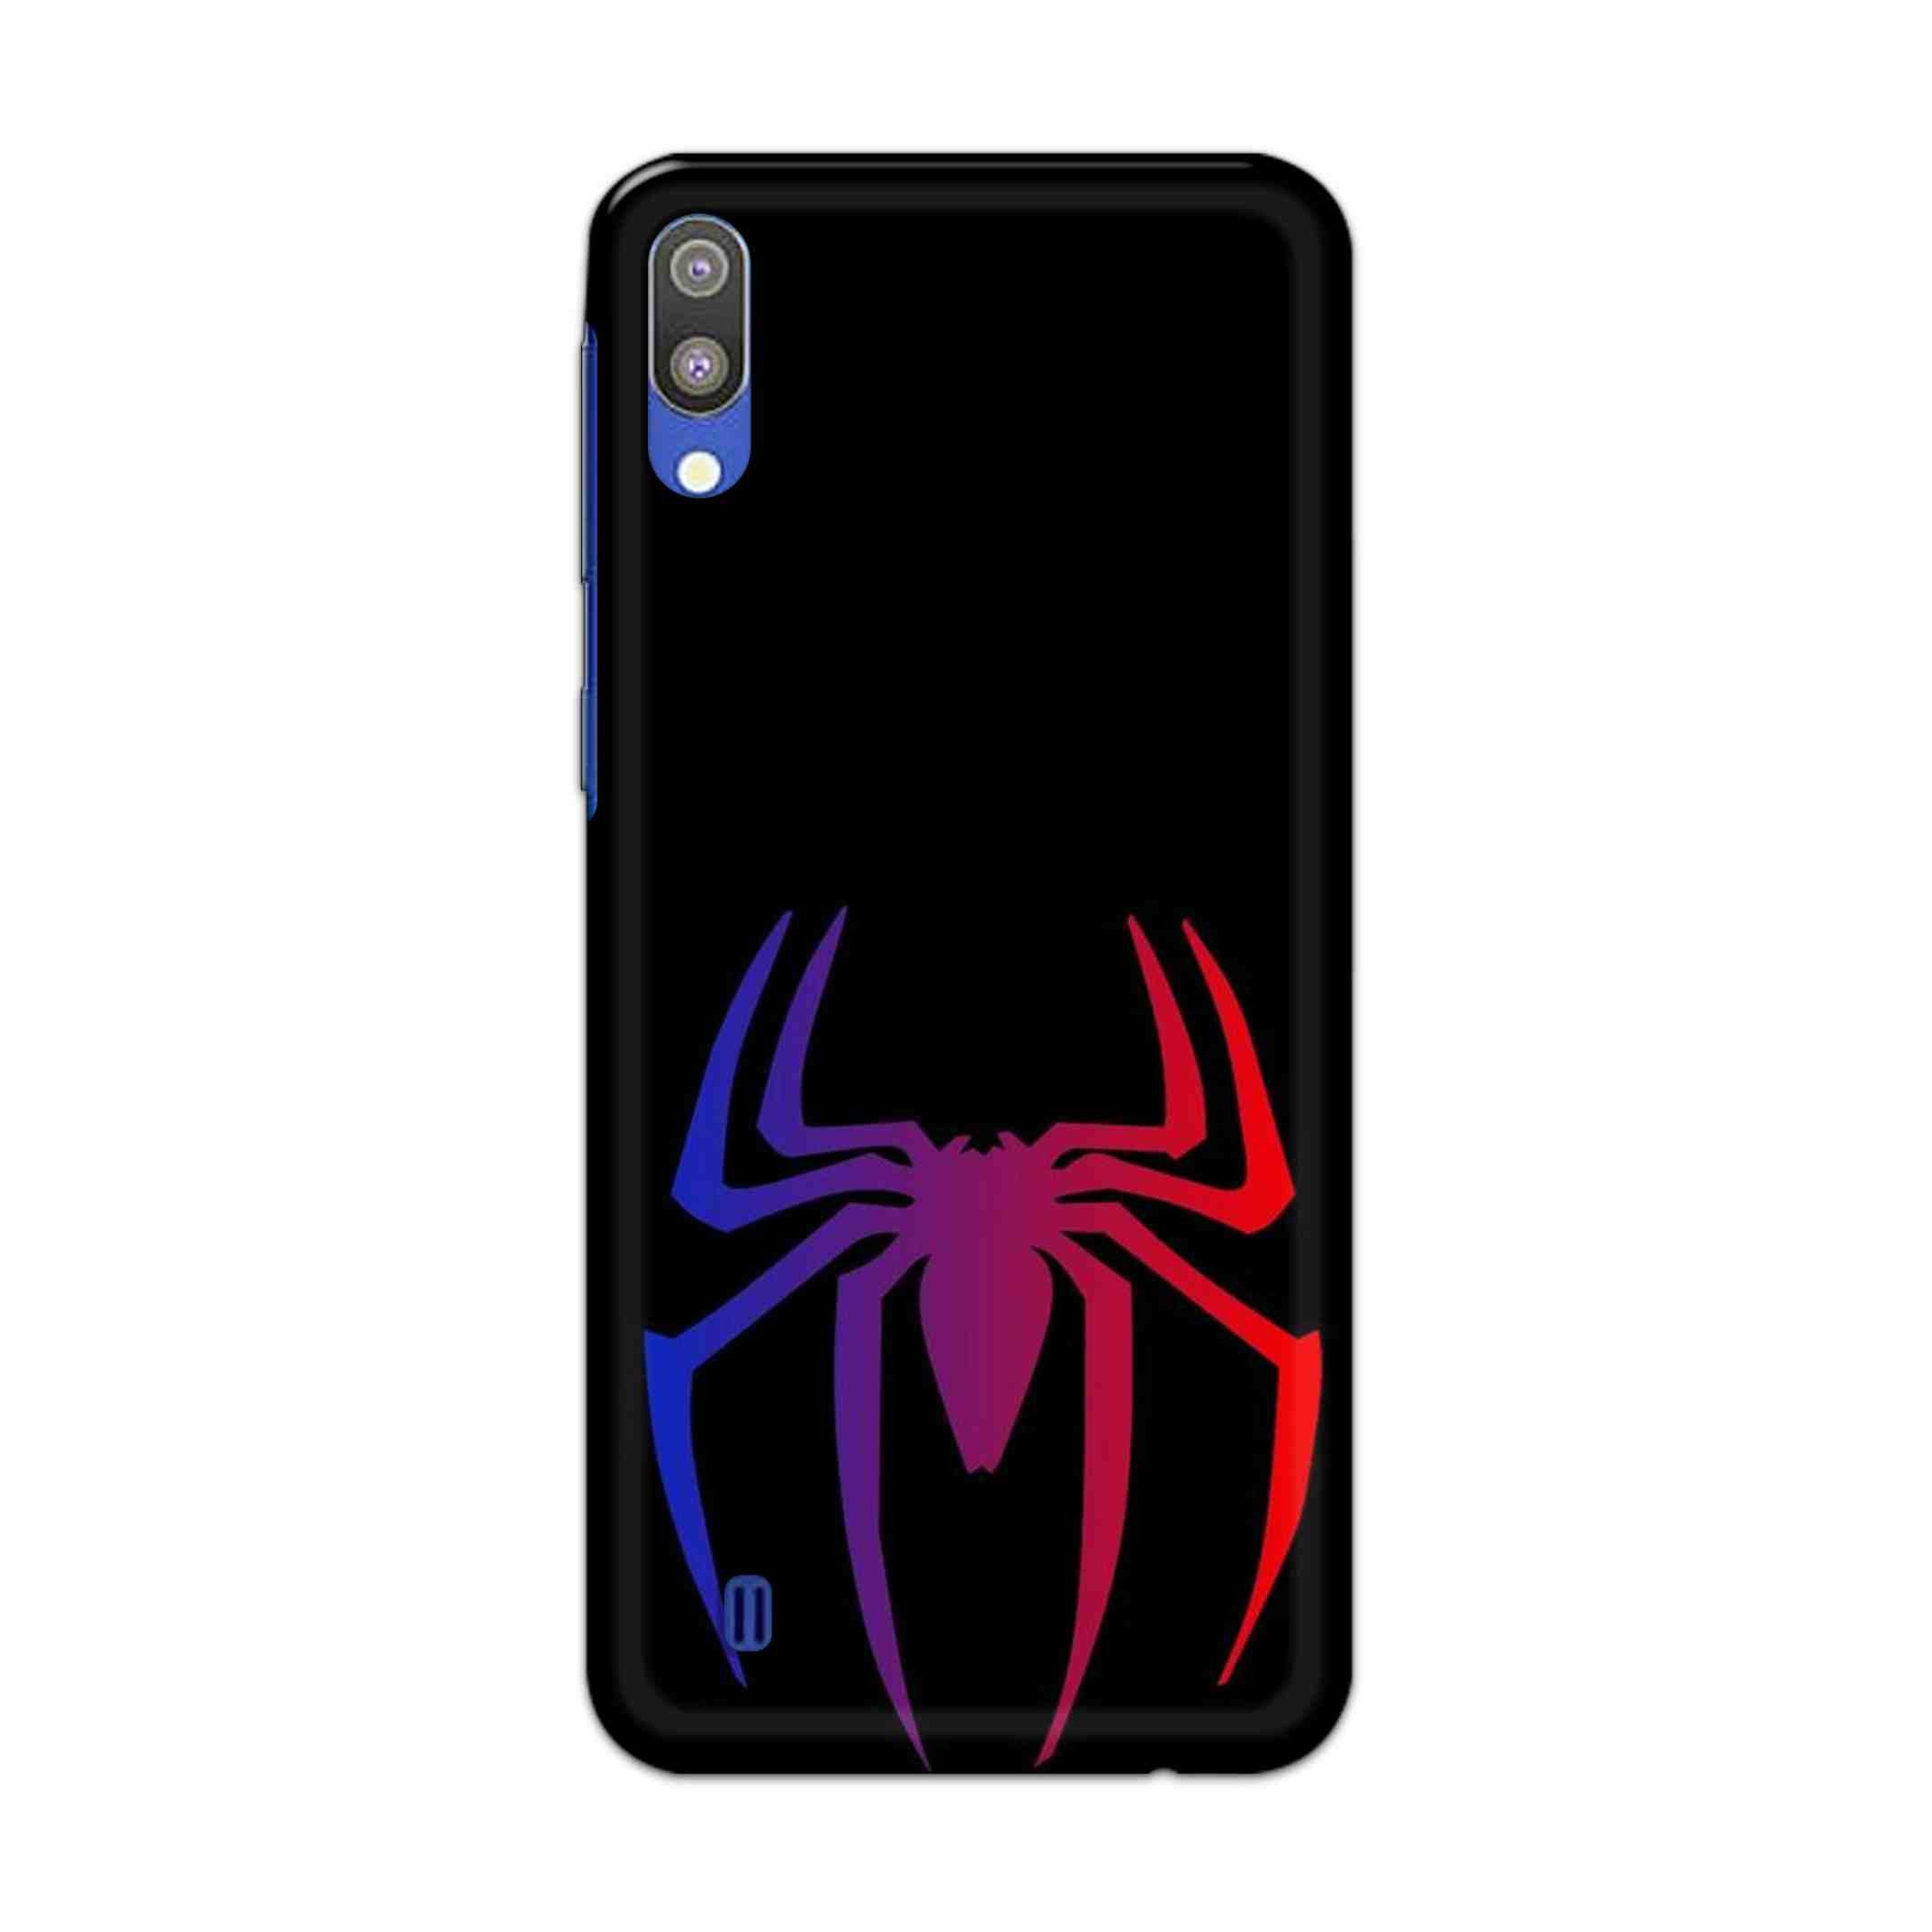 Buy Neon Spiderman Logo Hard Back Mobile Phone Case Cover For Samsung Galaxy M10 Online